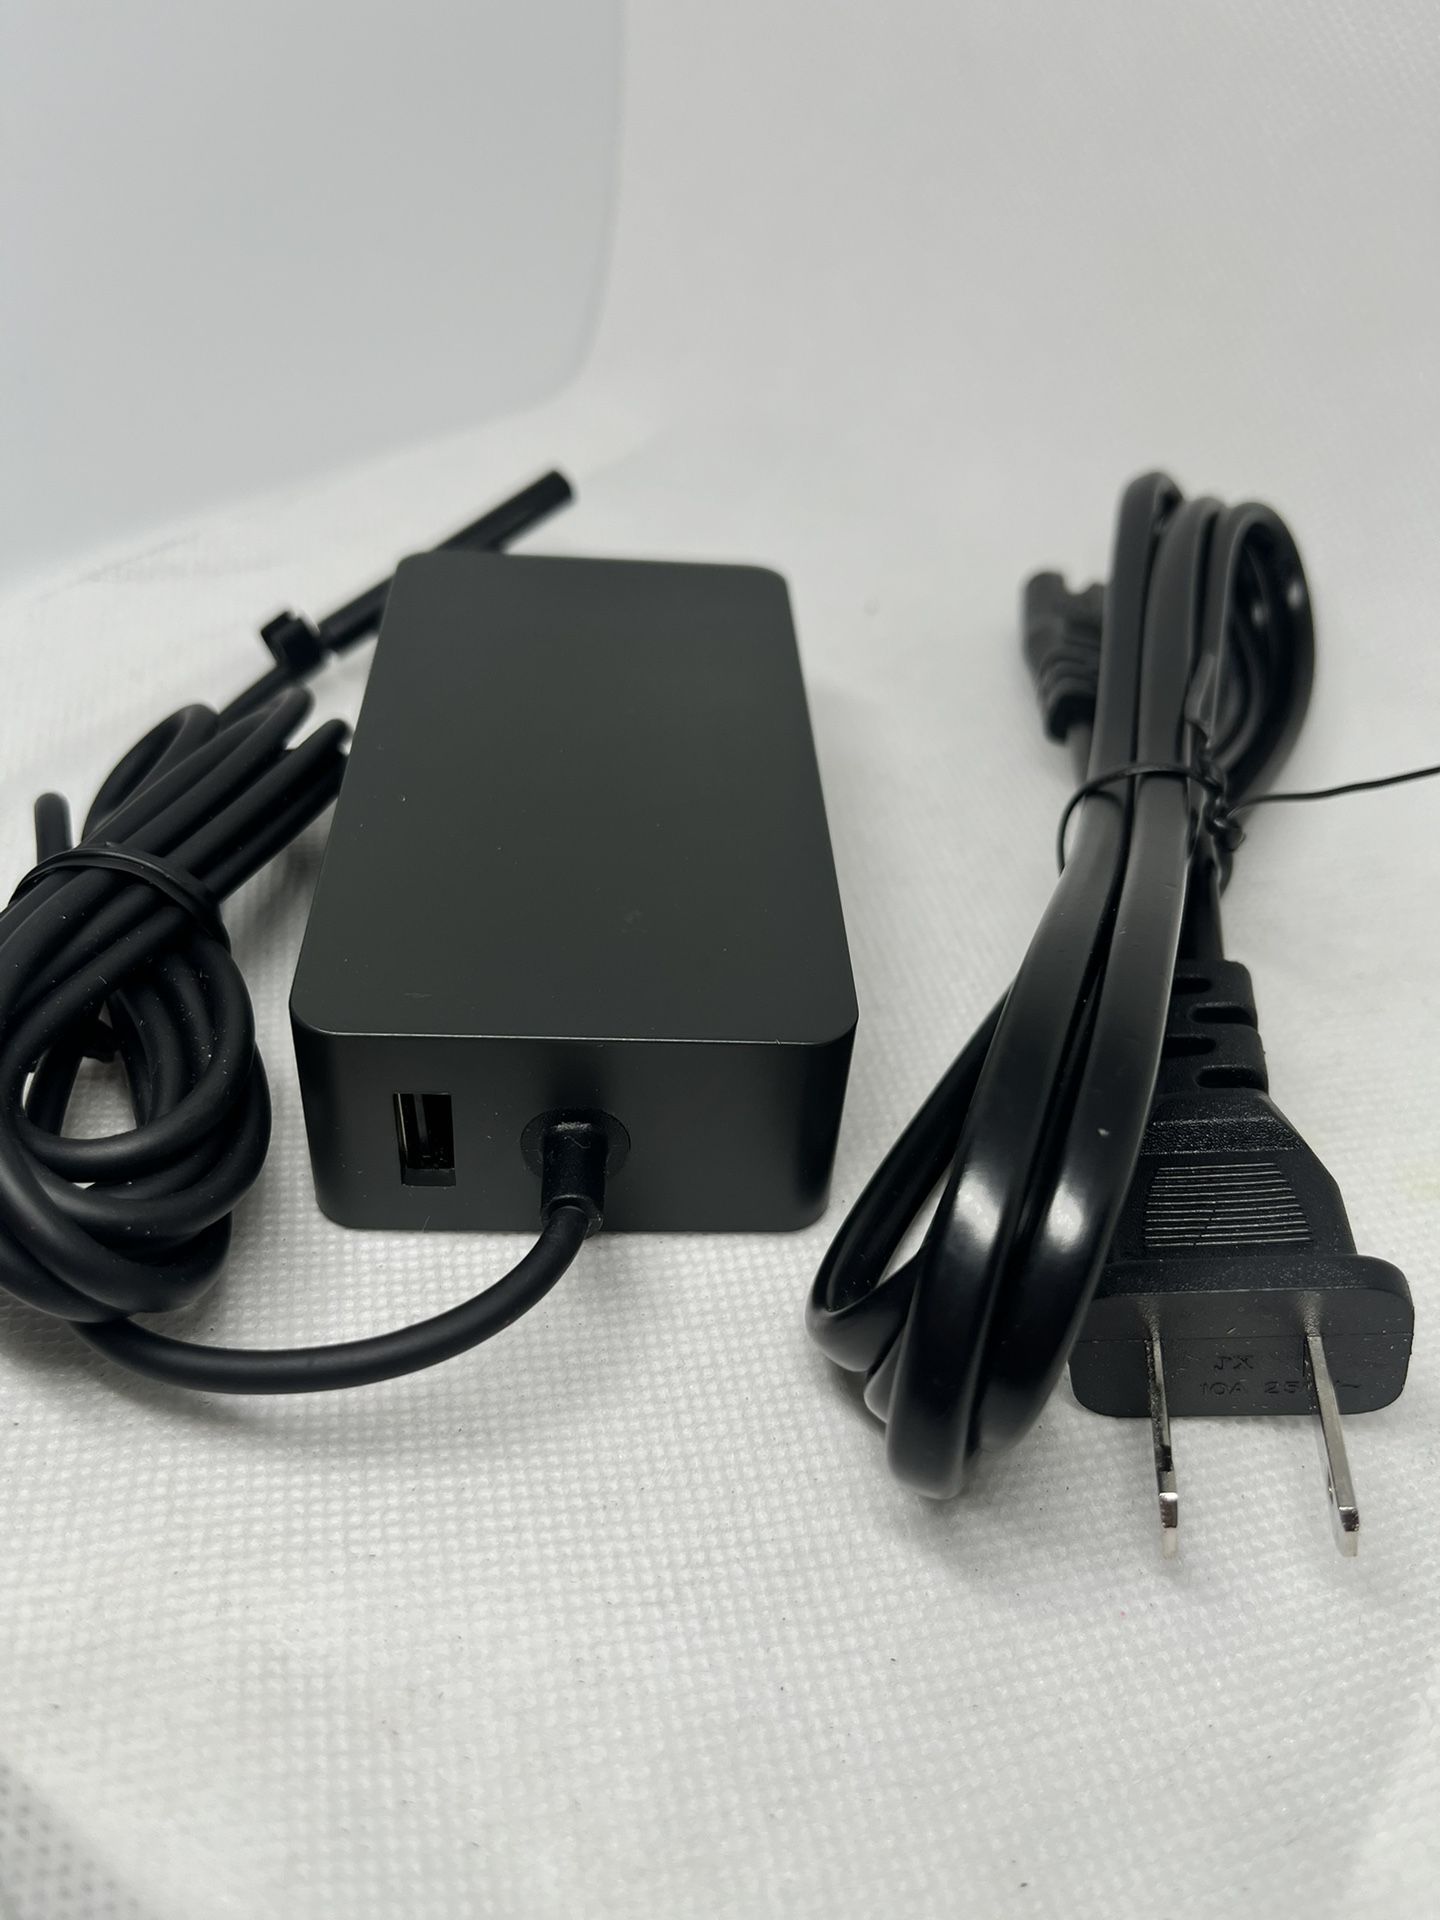 Compatible with: Surface Pro 3 Charger Surface Pro 4 Charger Surface Pro 5 Charger Surface Pro 6 Charger Surface Pro 7 Charger Surface Pro 8 Charger S